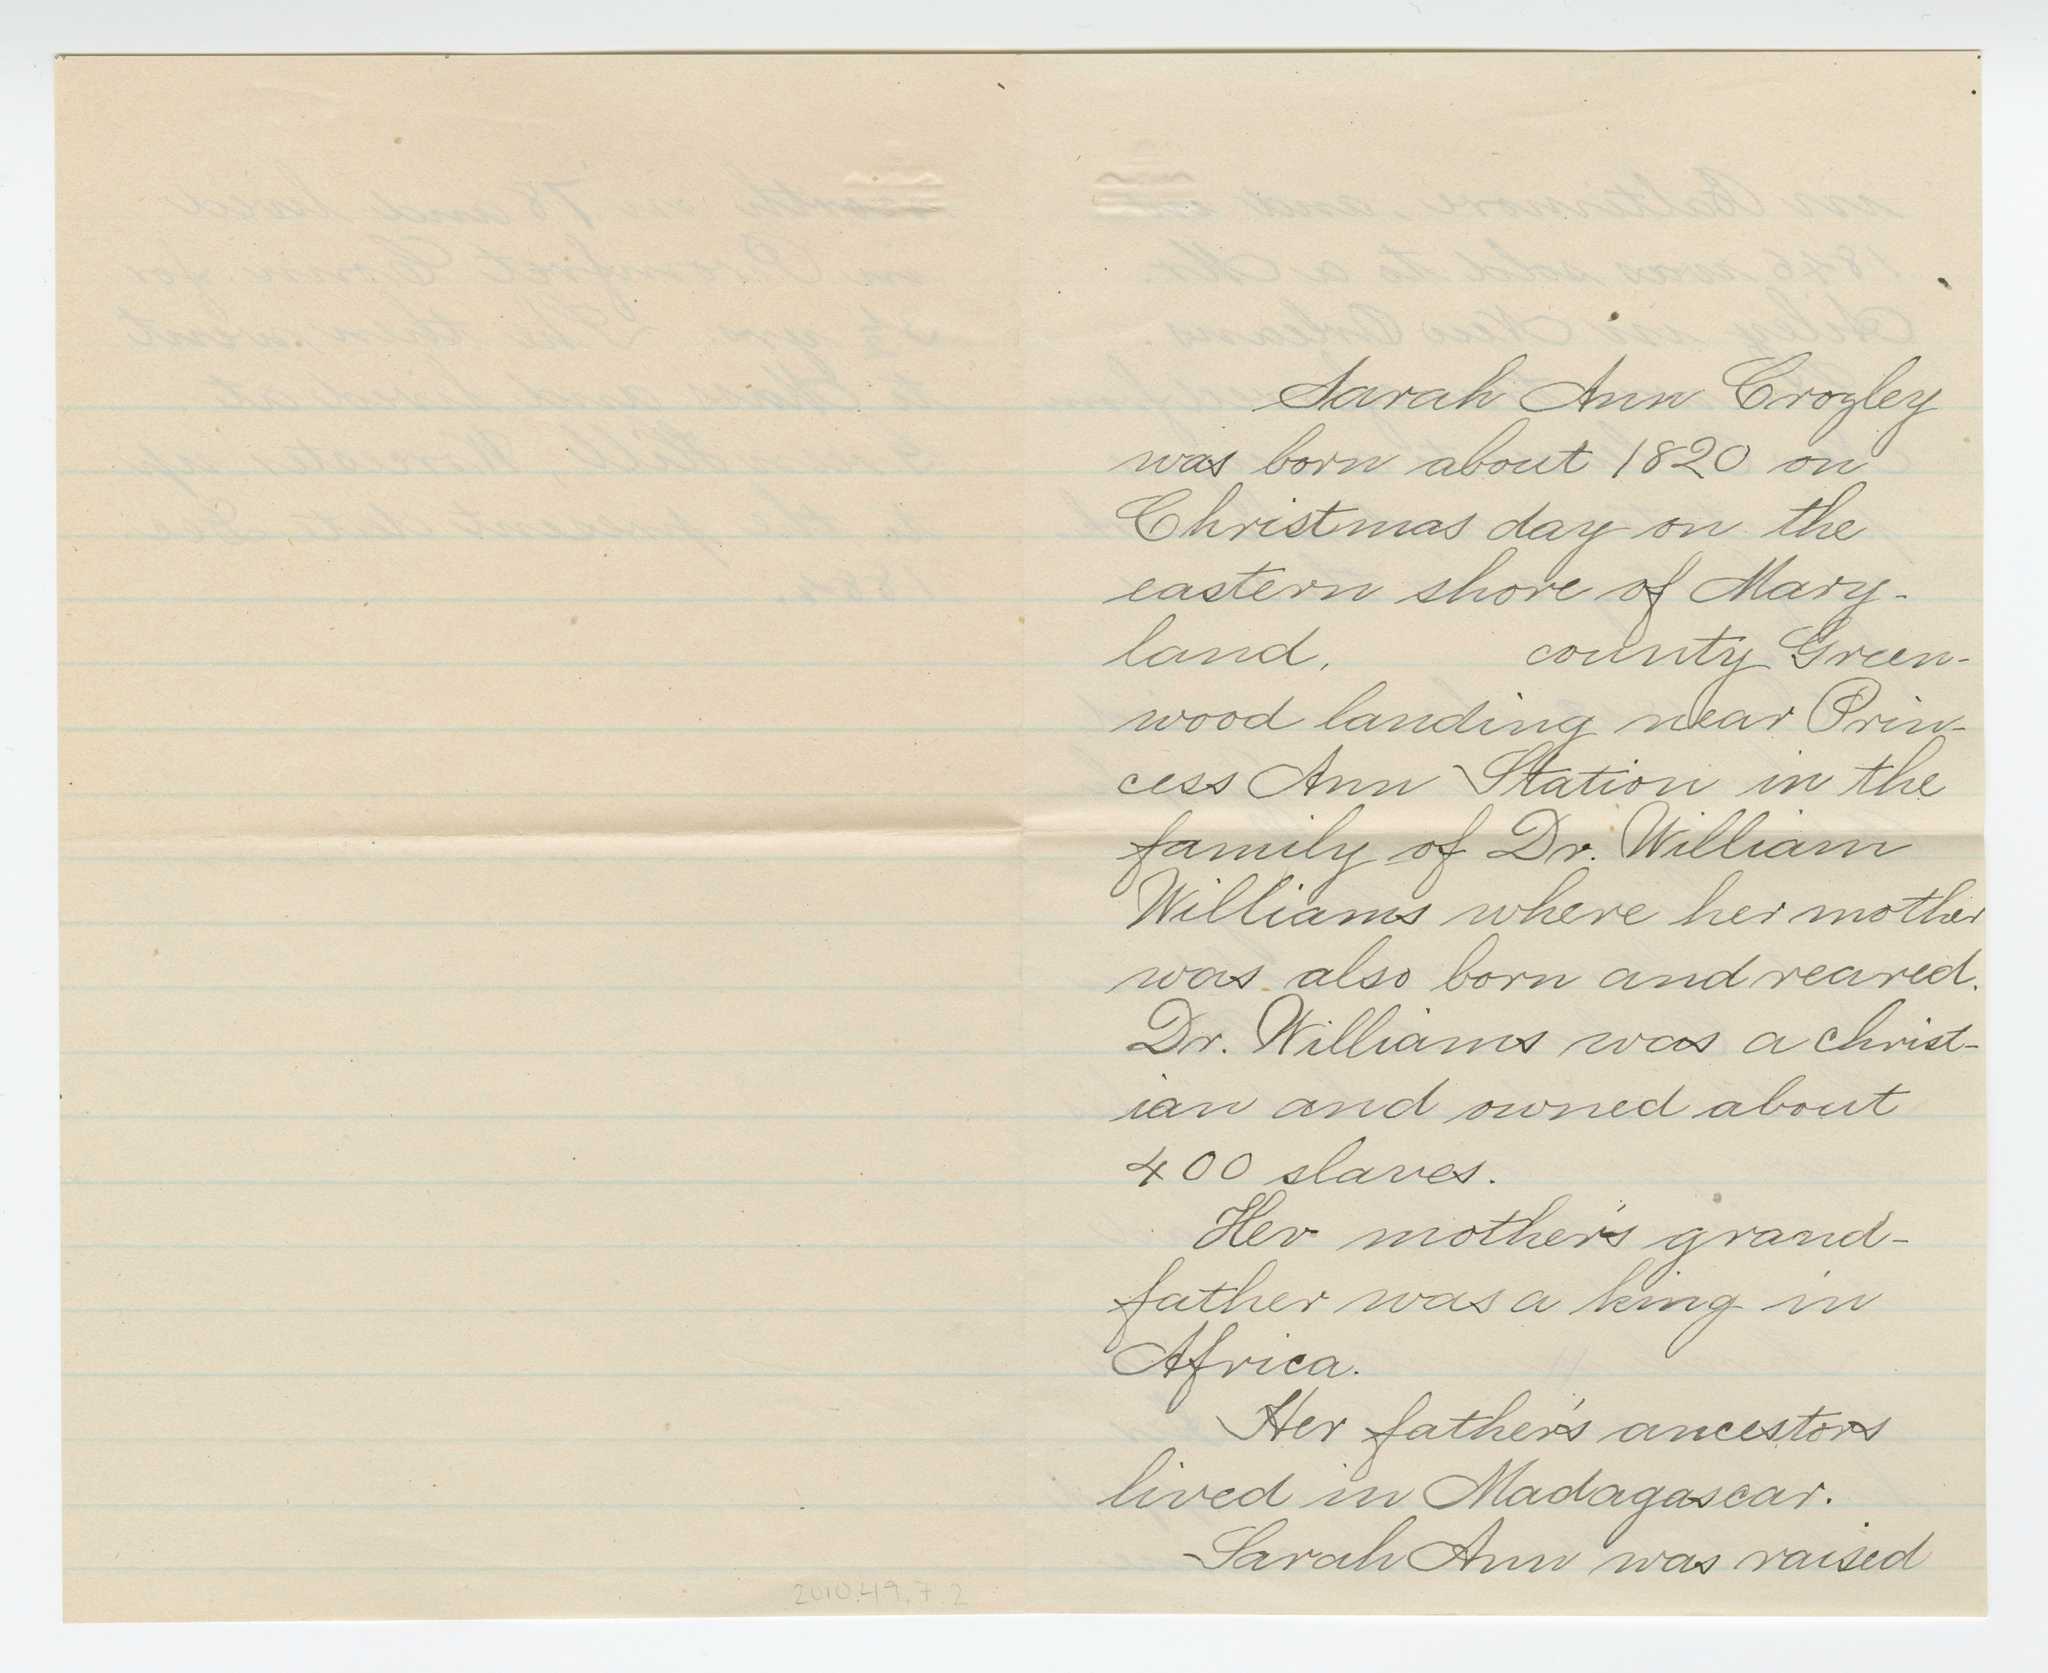 A handwritten black ink on lined paper. The writing is on the front and inside of the paper, which is folded in half. This appears to be a transcription of the original biography, containing spelling and grammar corrections not seen in the original which is part of the collection as well, 2010.49.4.1. The document is a short biography of Sarah Ann Blunt Crozely.